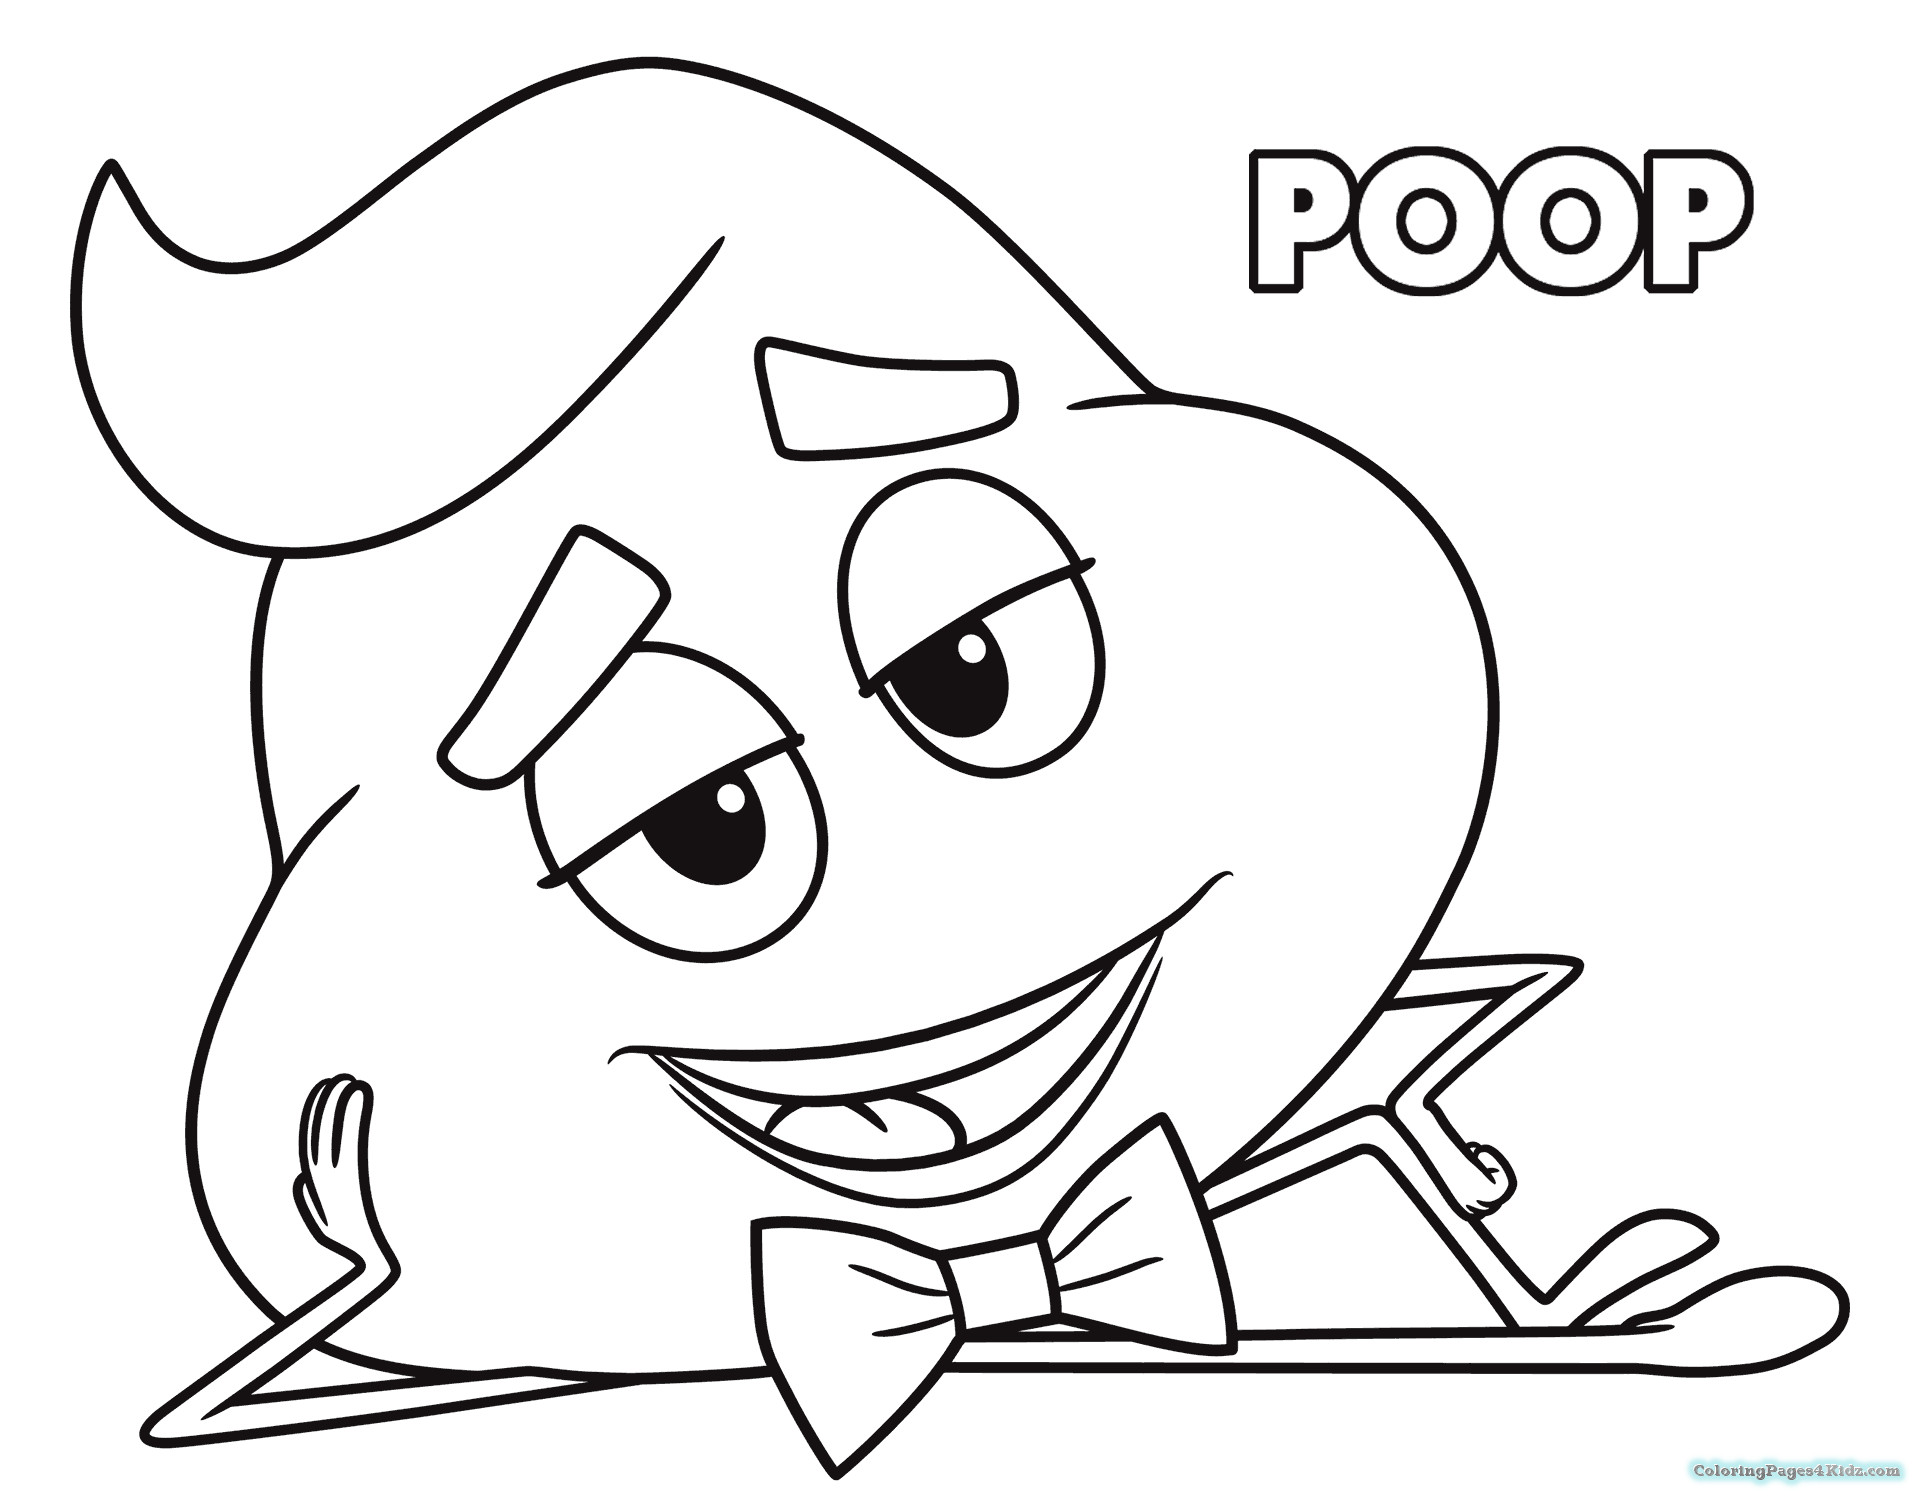 Emoji Coloring Pages For Kids
 The Emoji Movie Coloring Pages